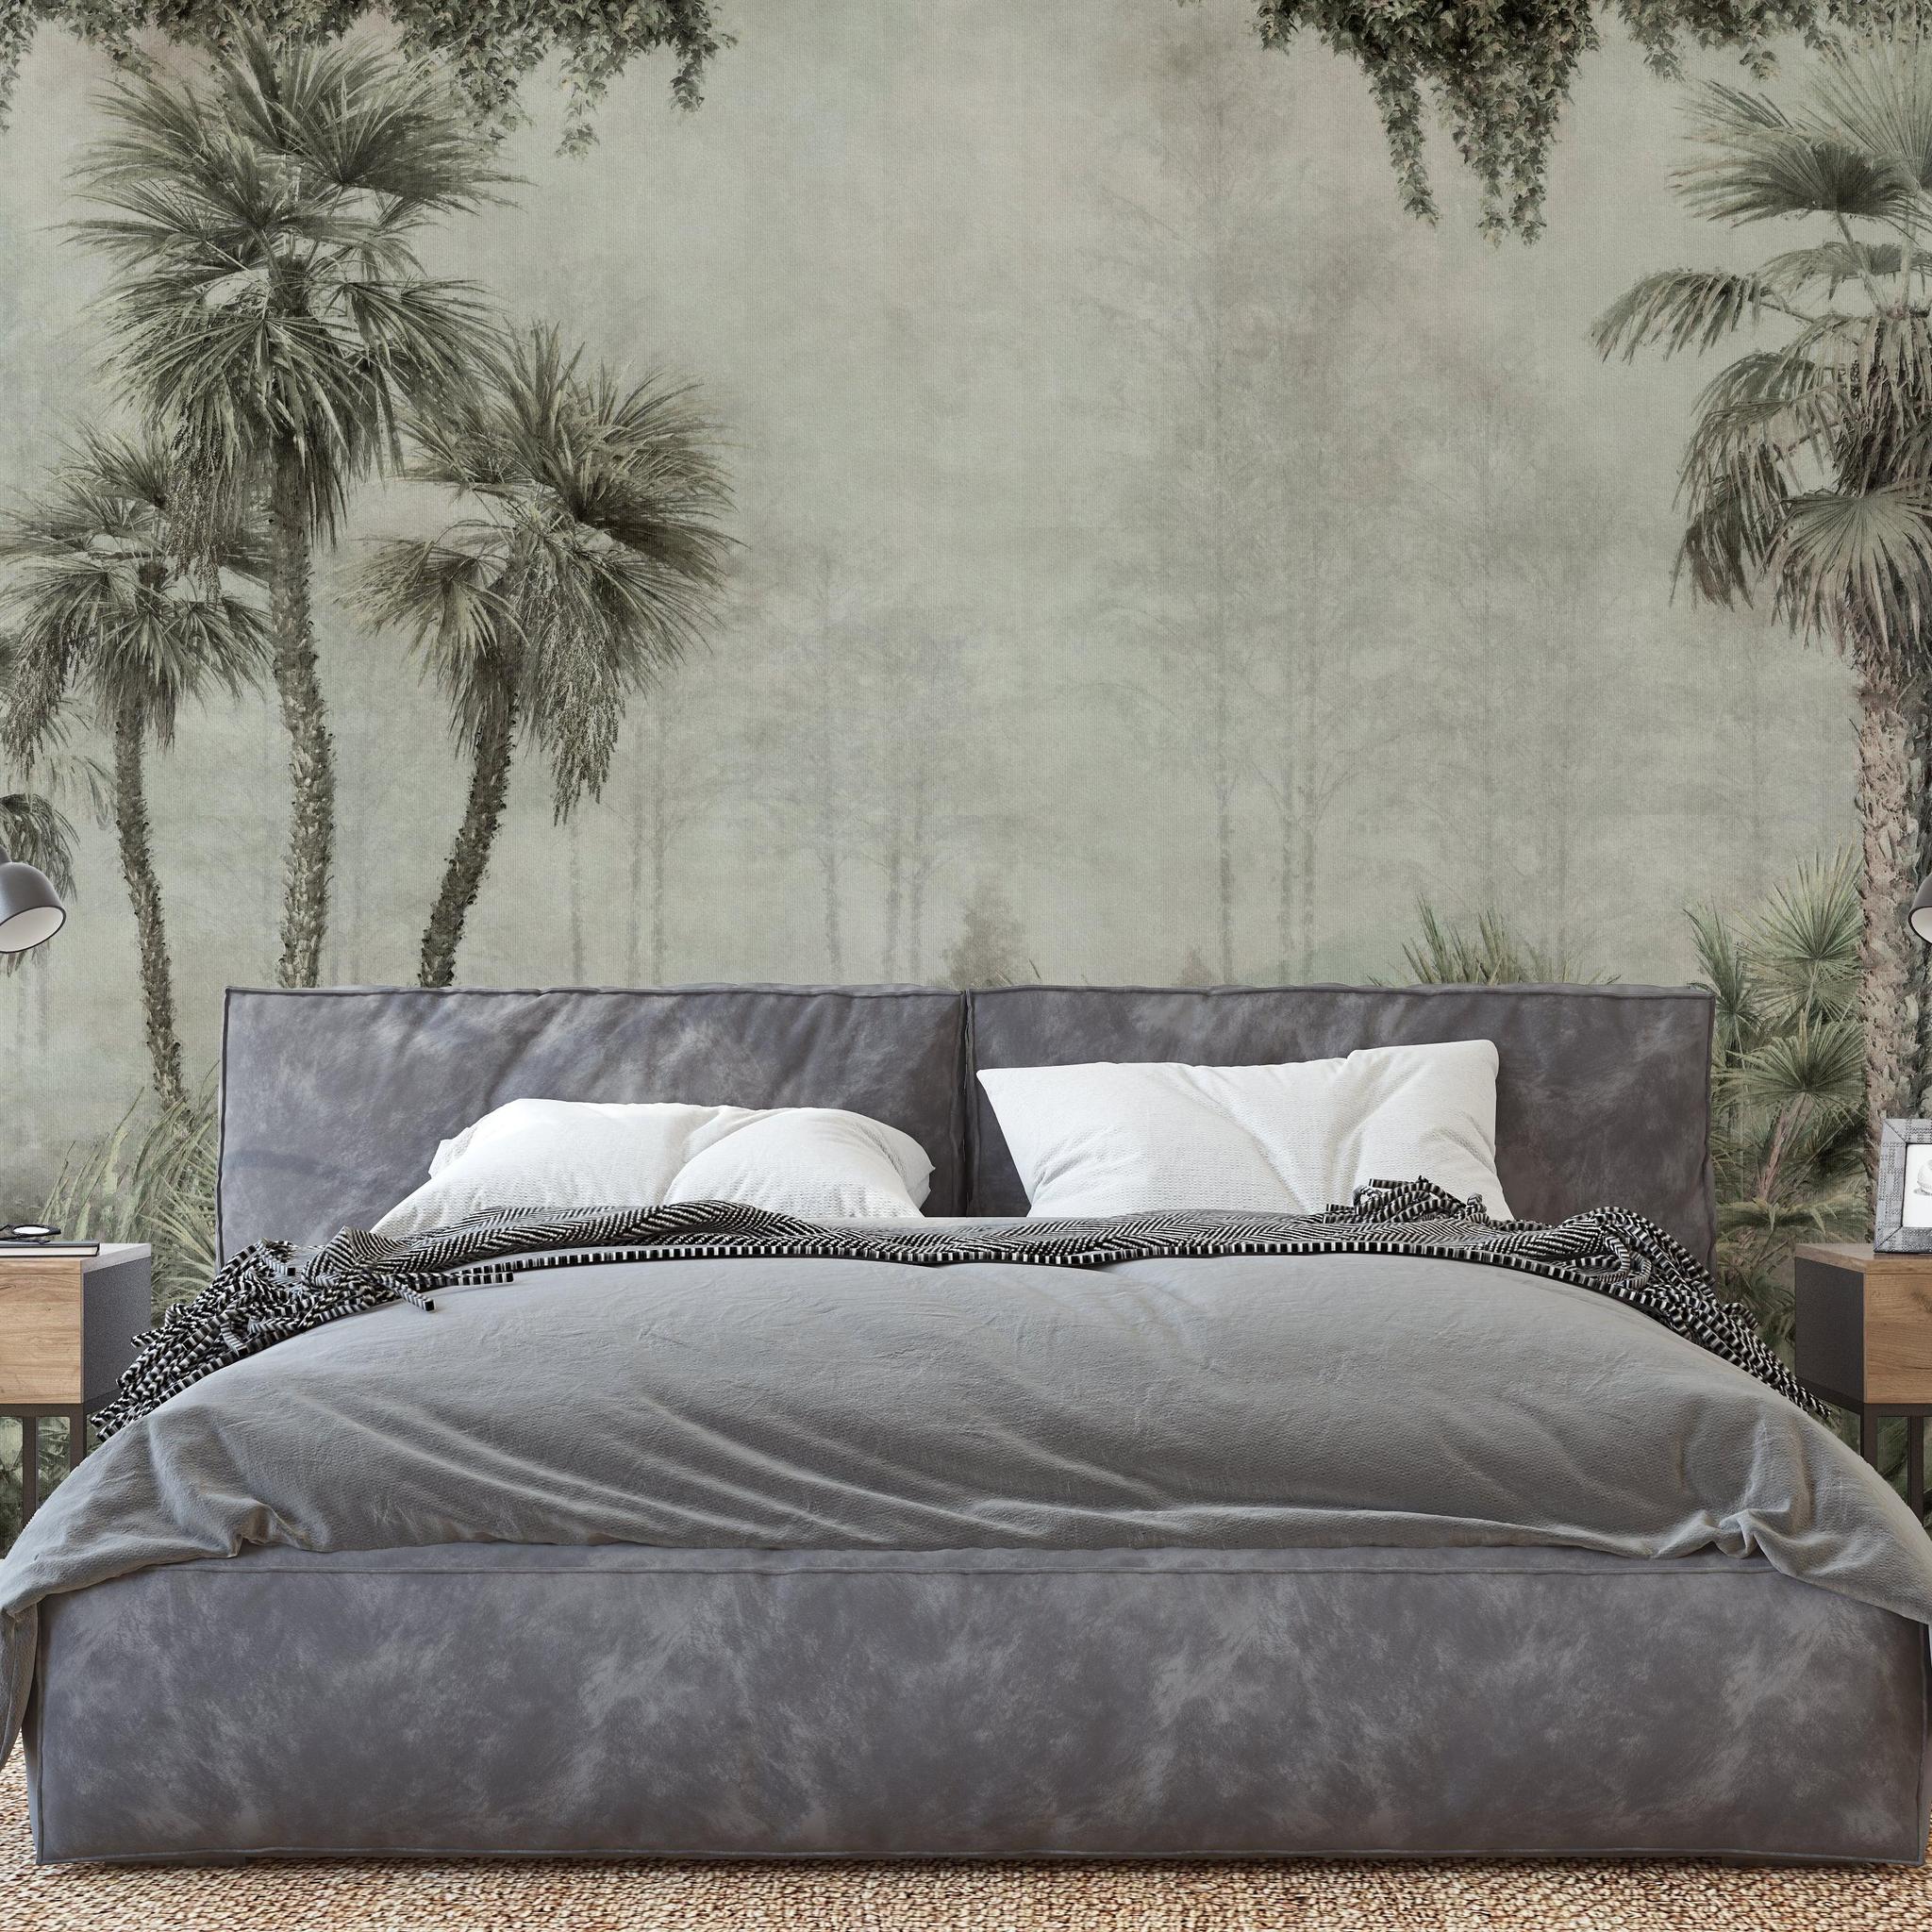 Mowgli Wallpaper from Wall Blush enhancing the serene bedroom ambiance, with a focus on the tropical design.
